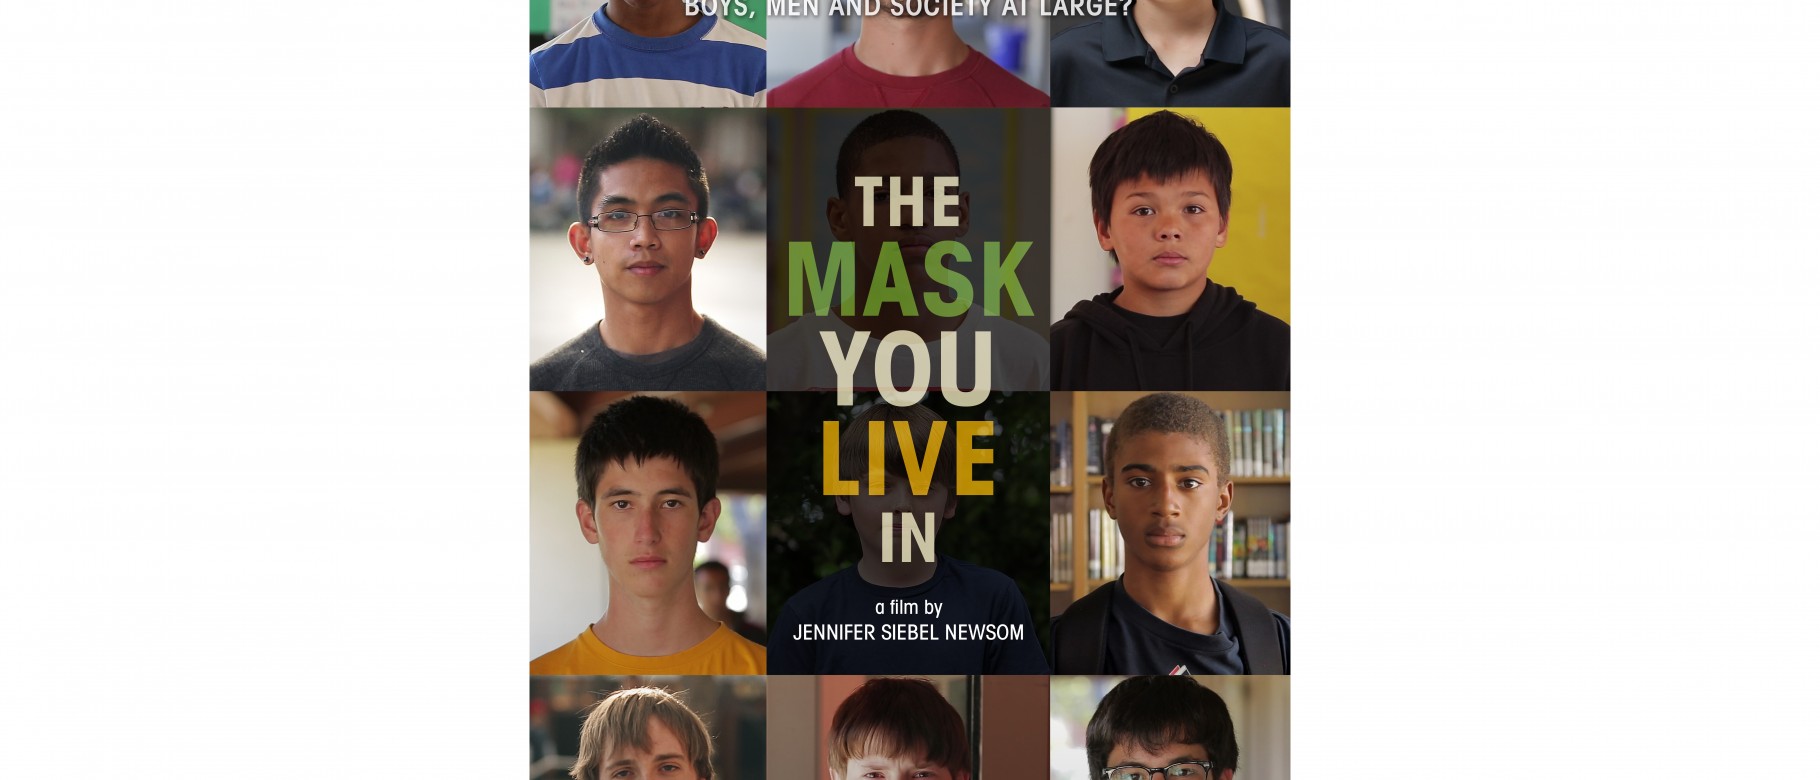 The Mask You Live In